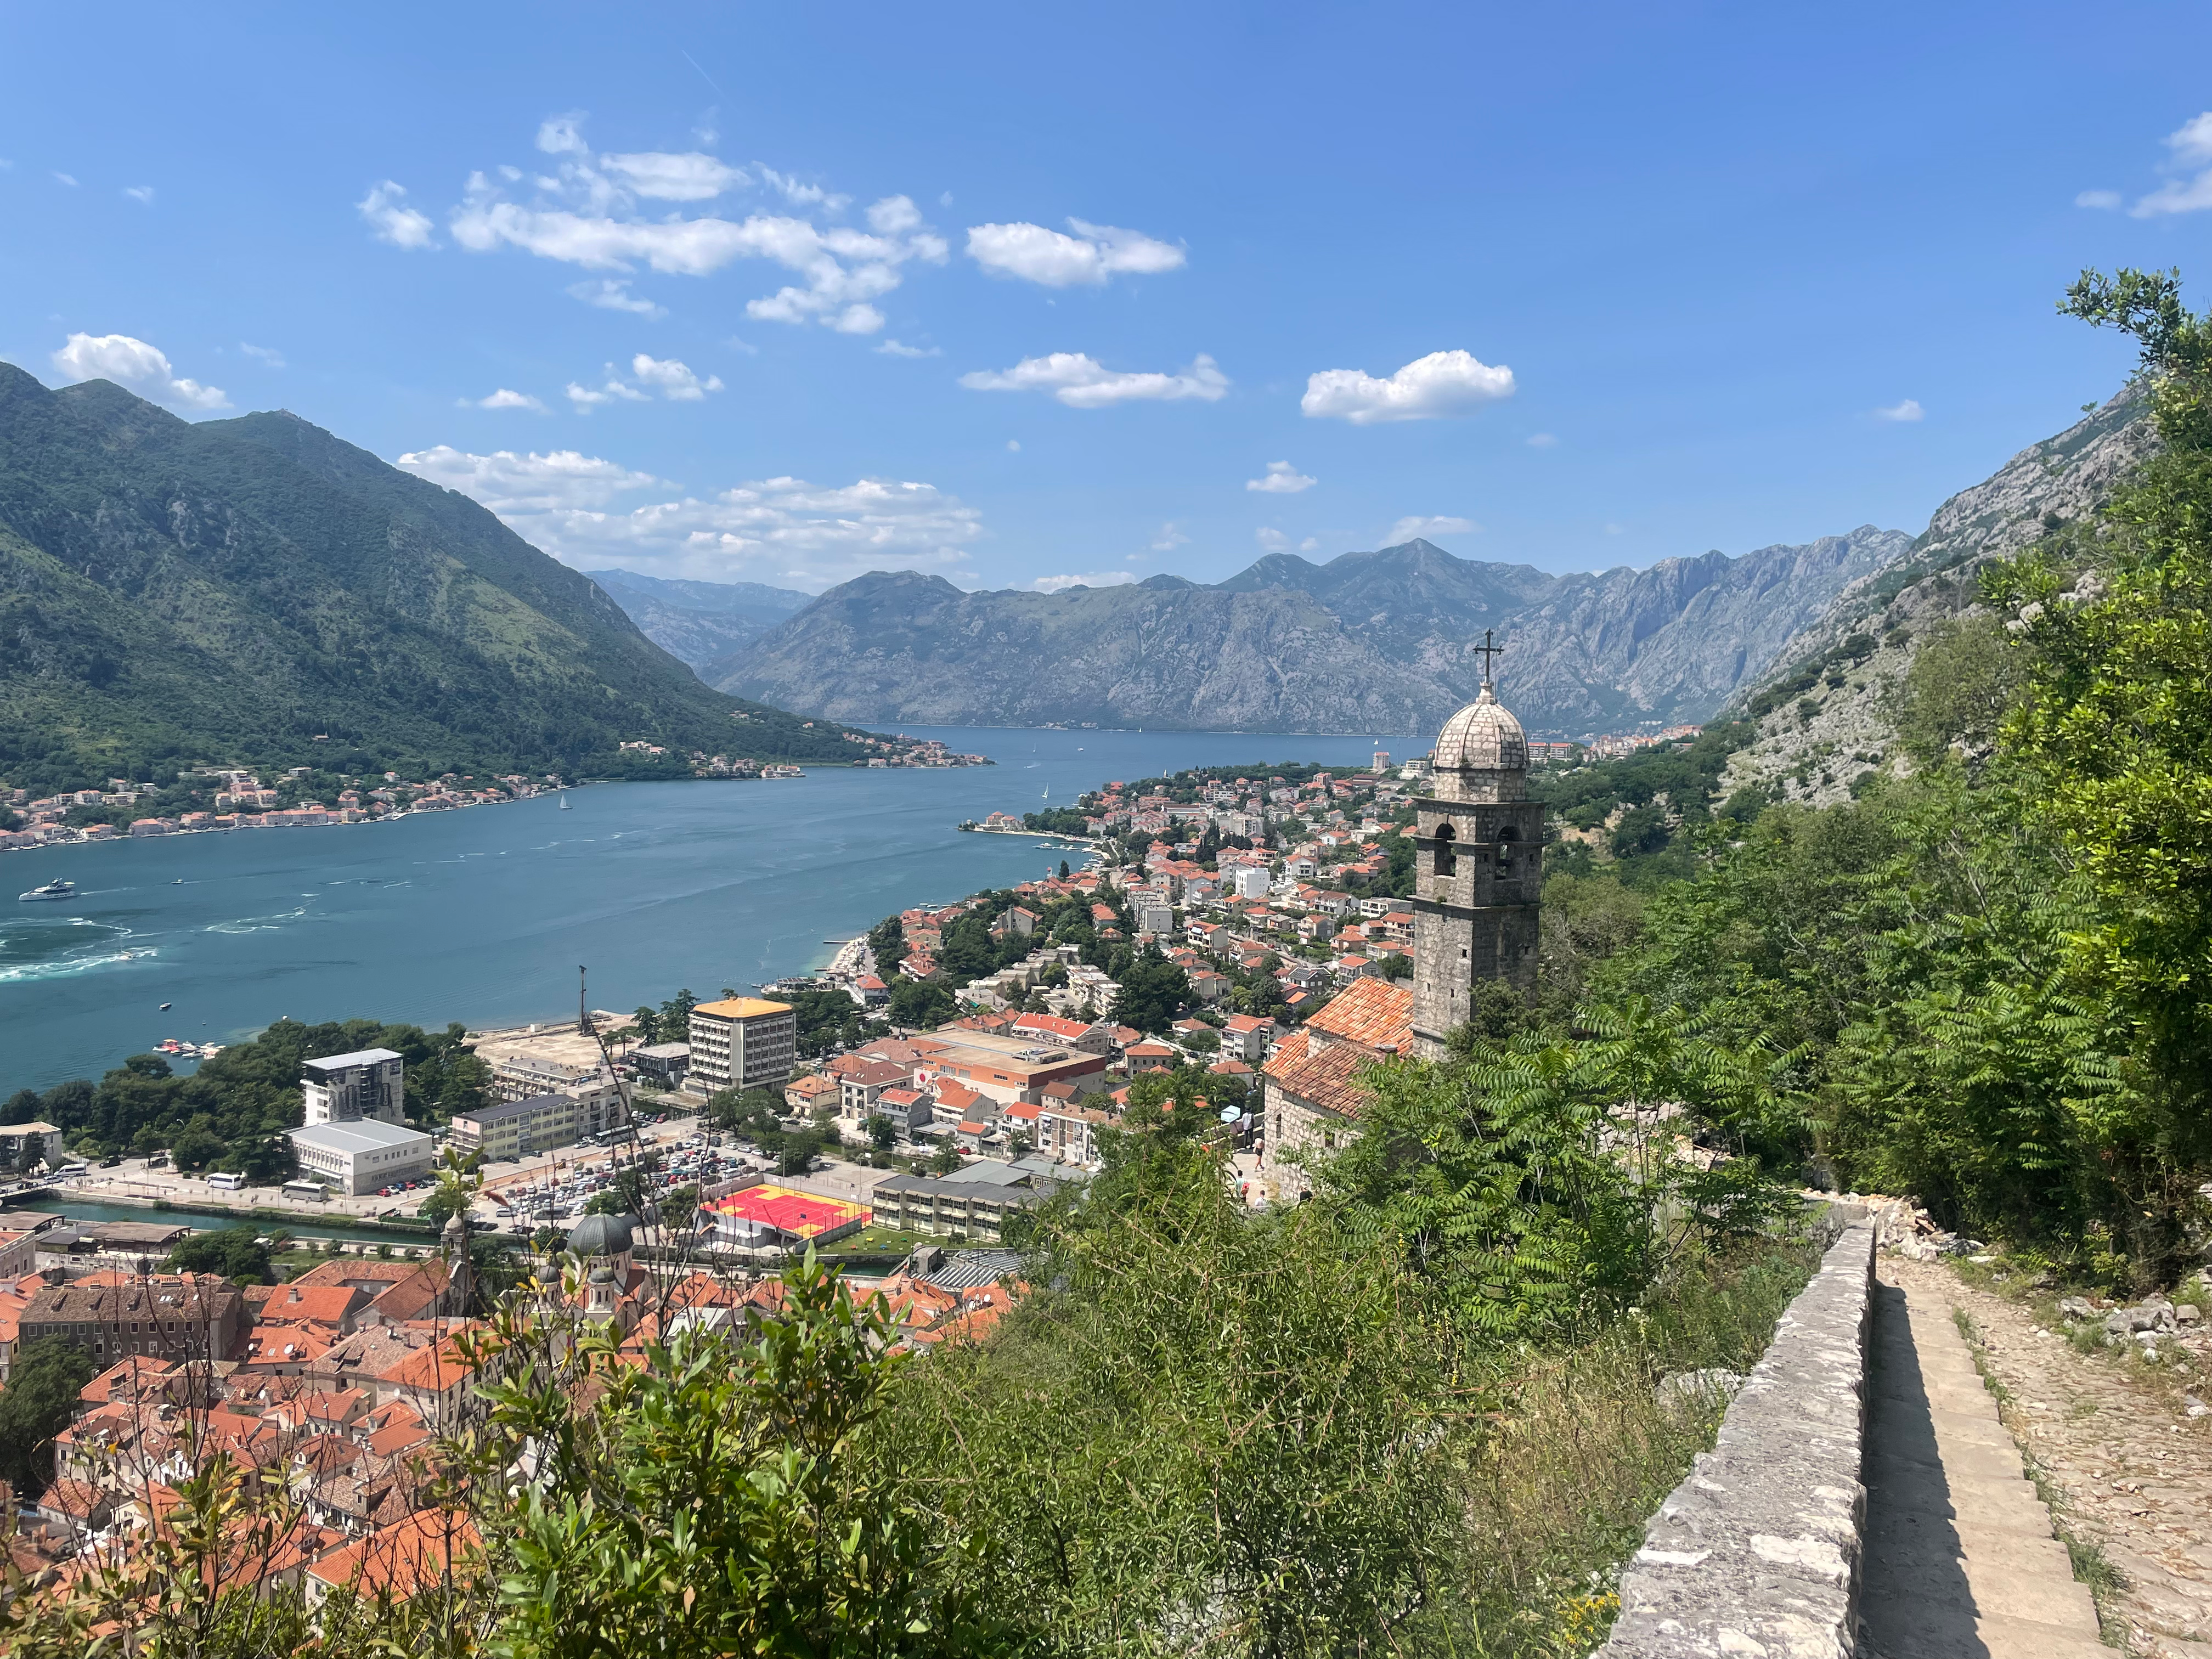 The Absolute Best Things to Do in Kotor